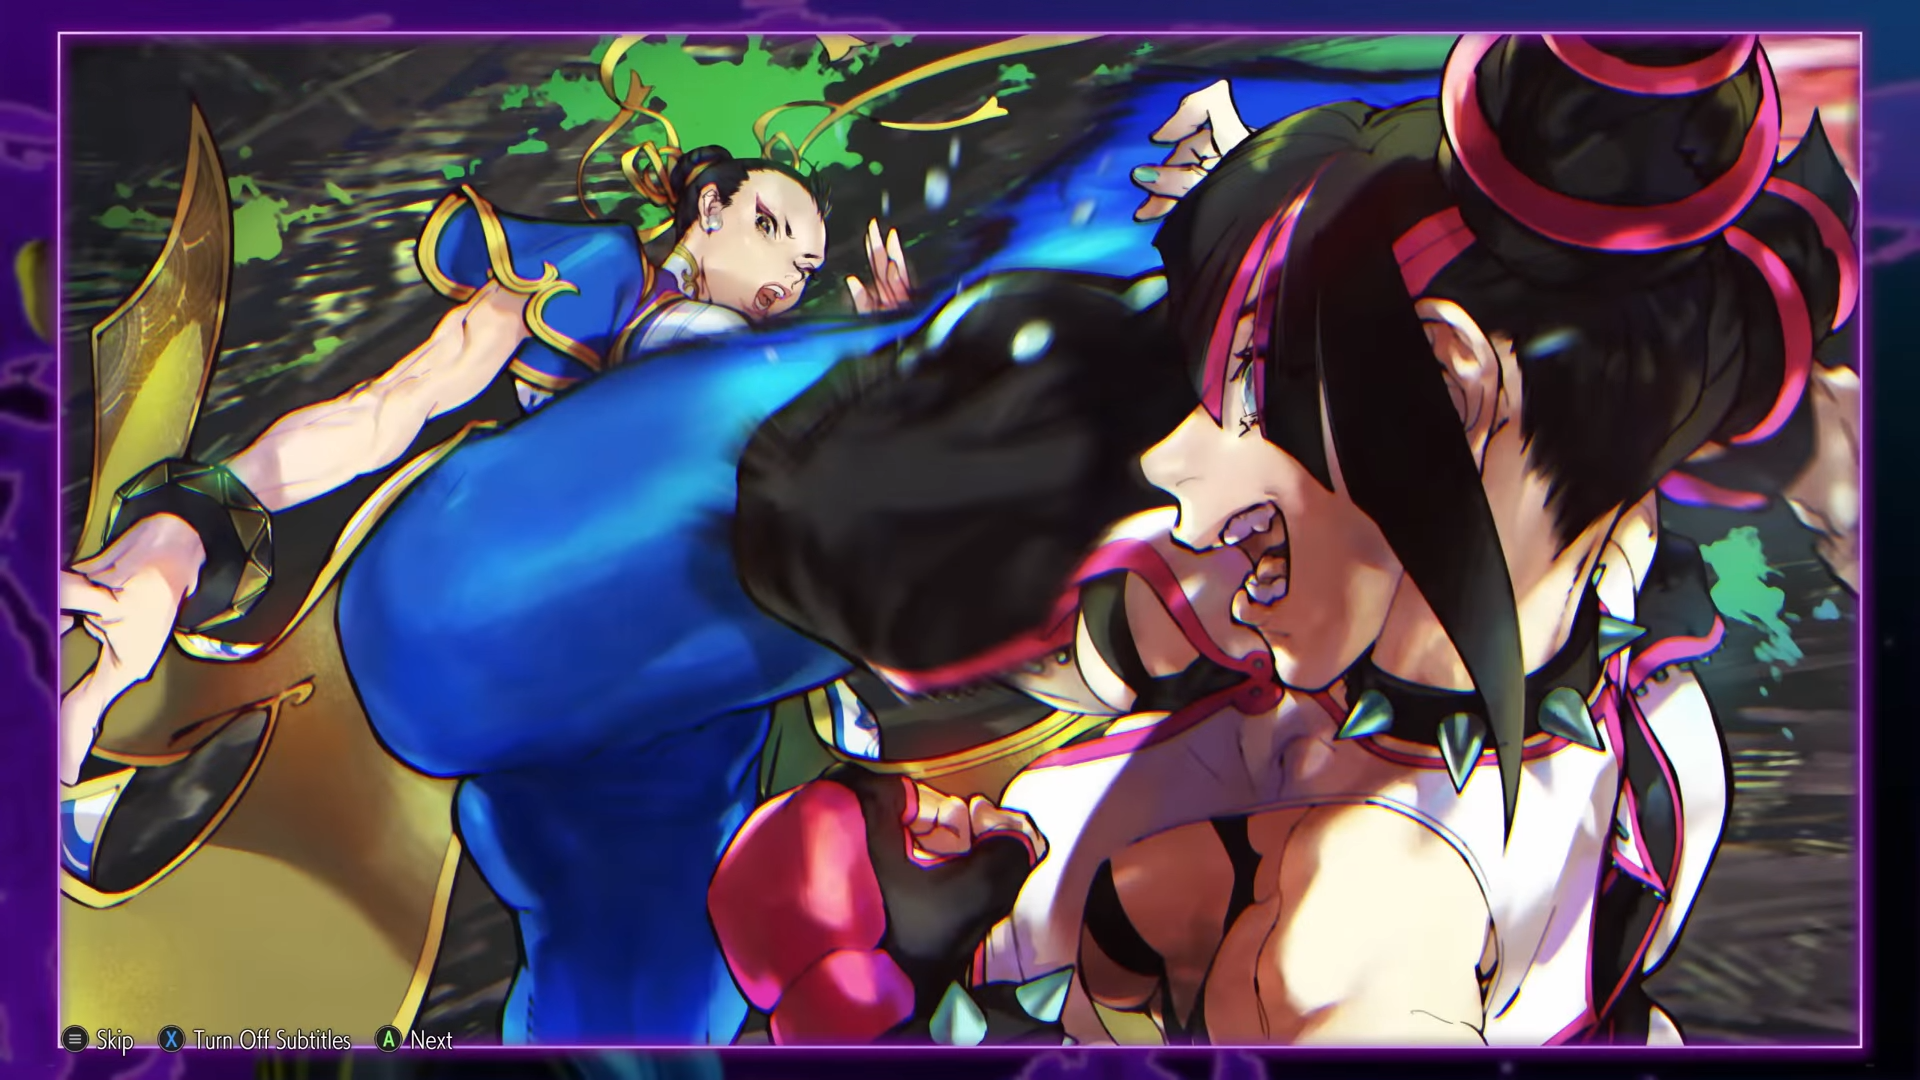 Street Fighter on X: ☯ “Come and show me everything that you